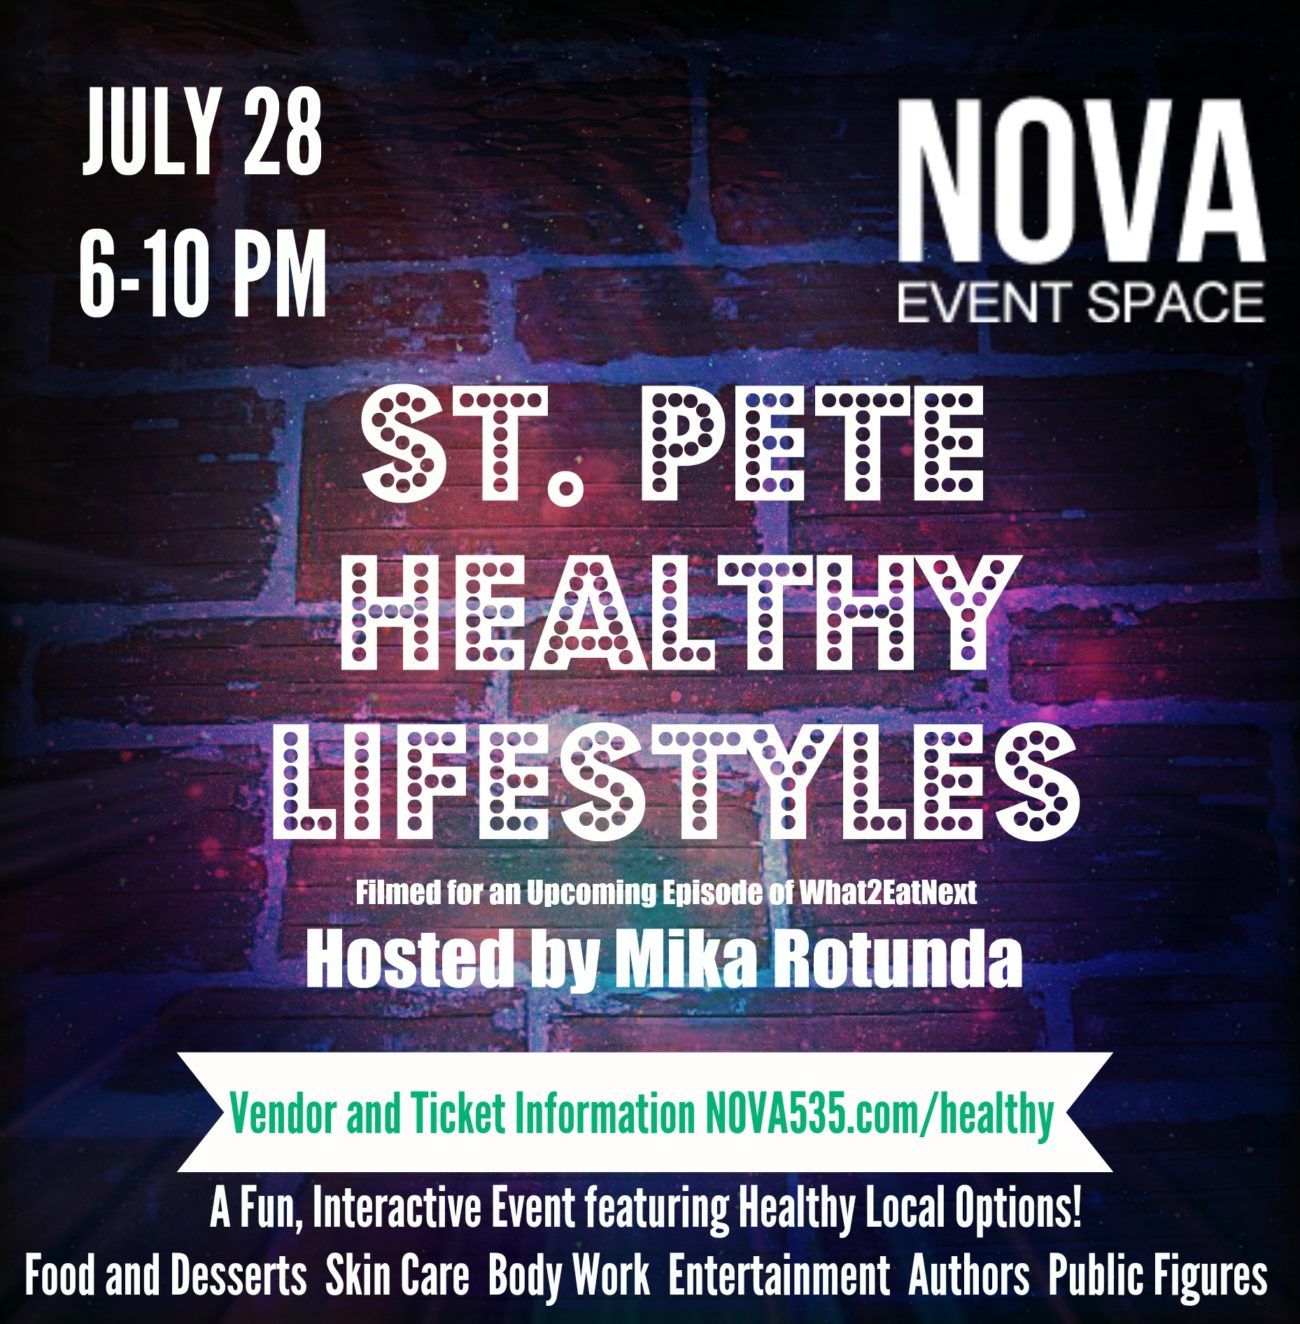 July 28 2016 at Downtown St. Pete venue NOVA 535 is St. Pete Healthy Lifestyles hosted by Mika Rotunda